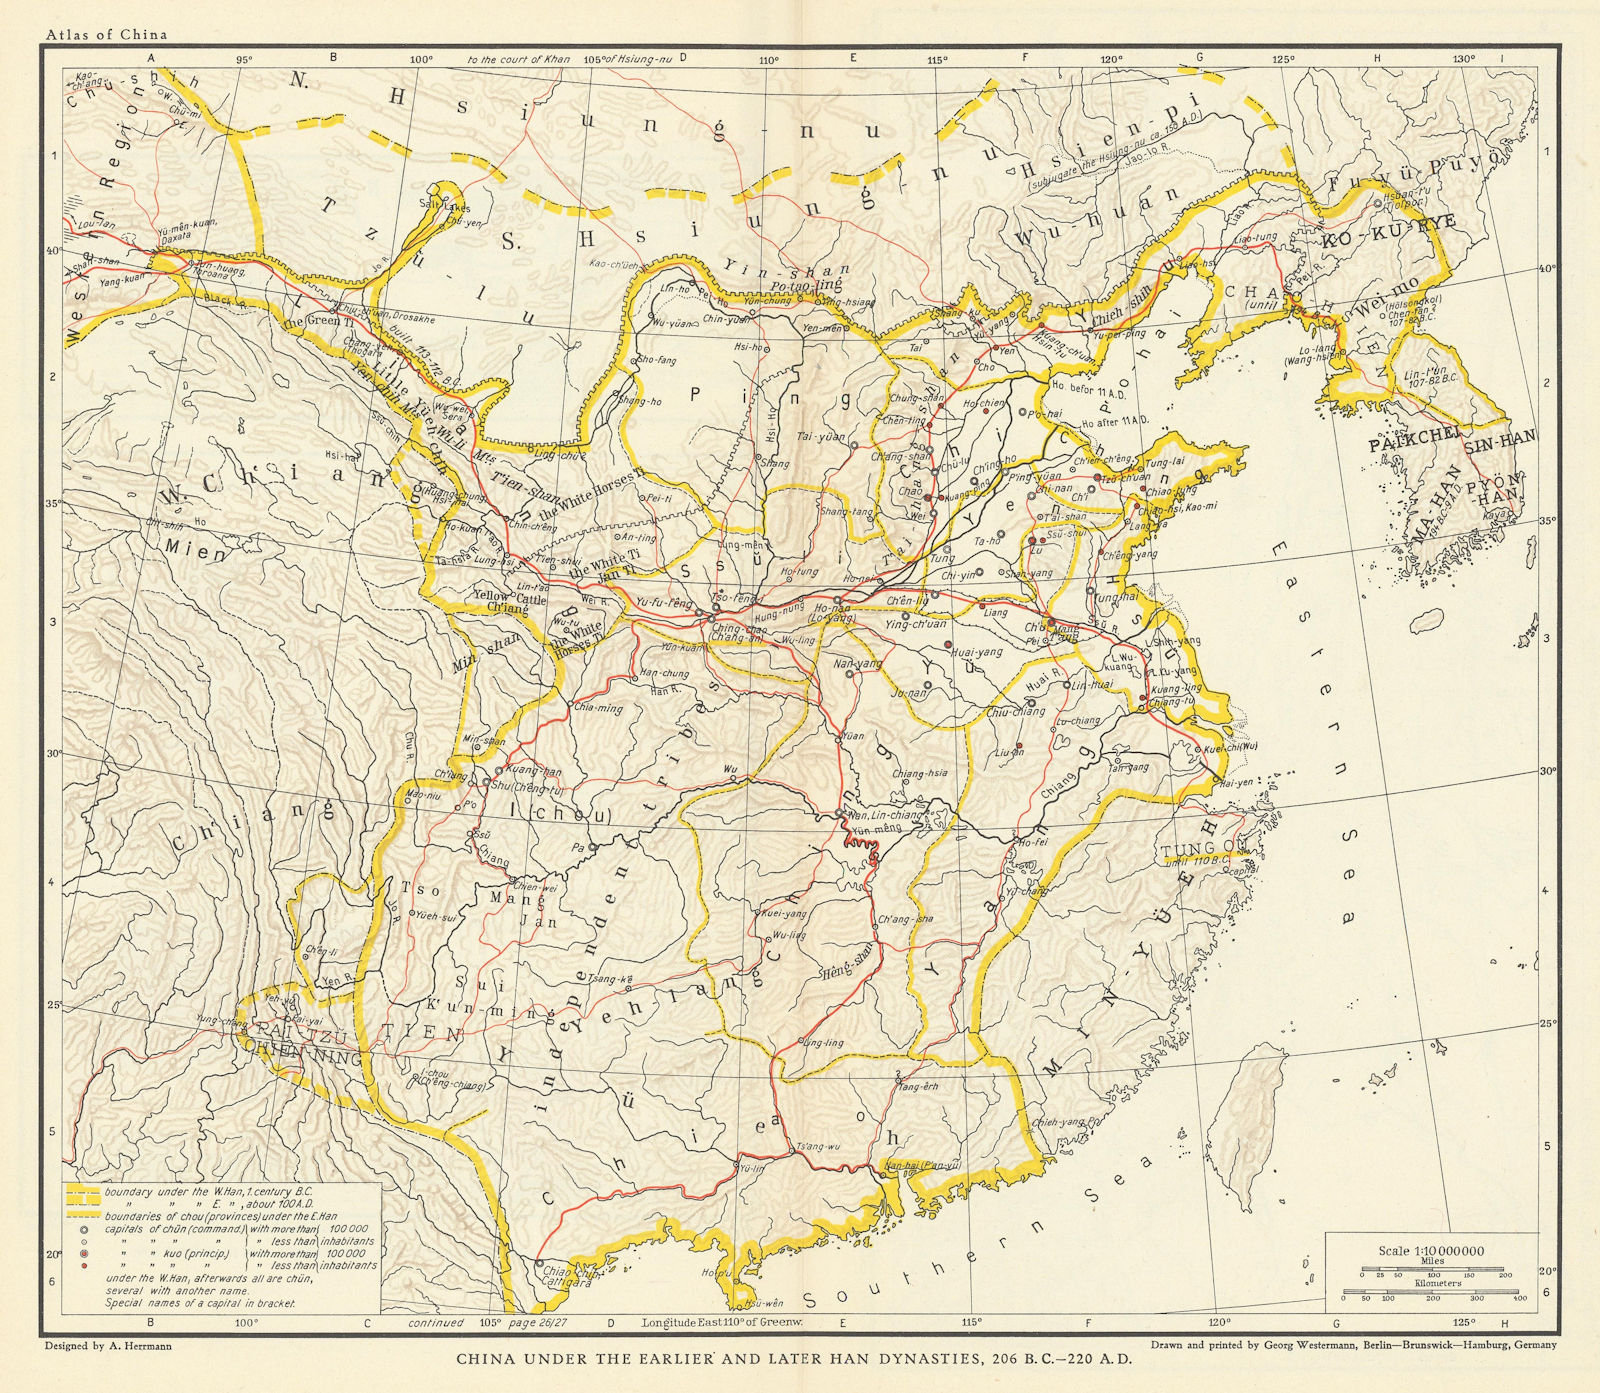 China under the Earlier & Later Han Dynasties 206 BC-220 AD 1935 old map